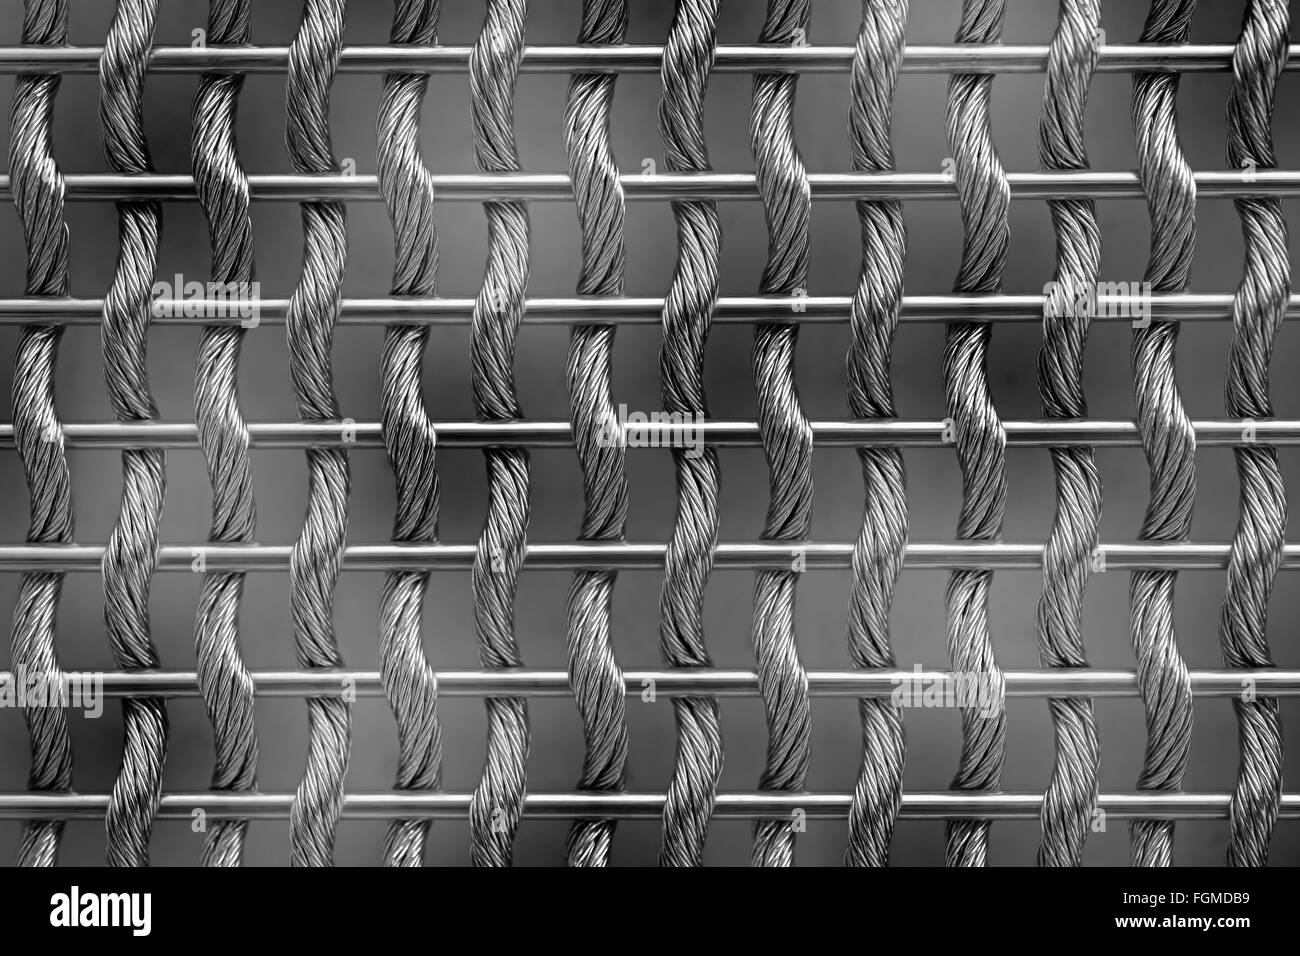 Steel woven wire mesh Stock Photo